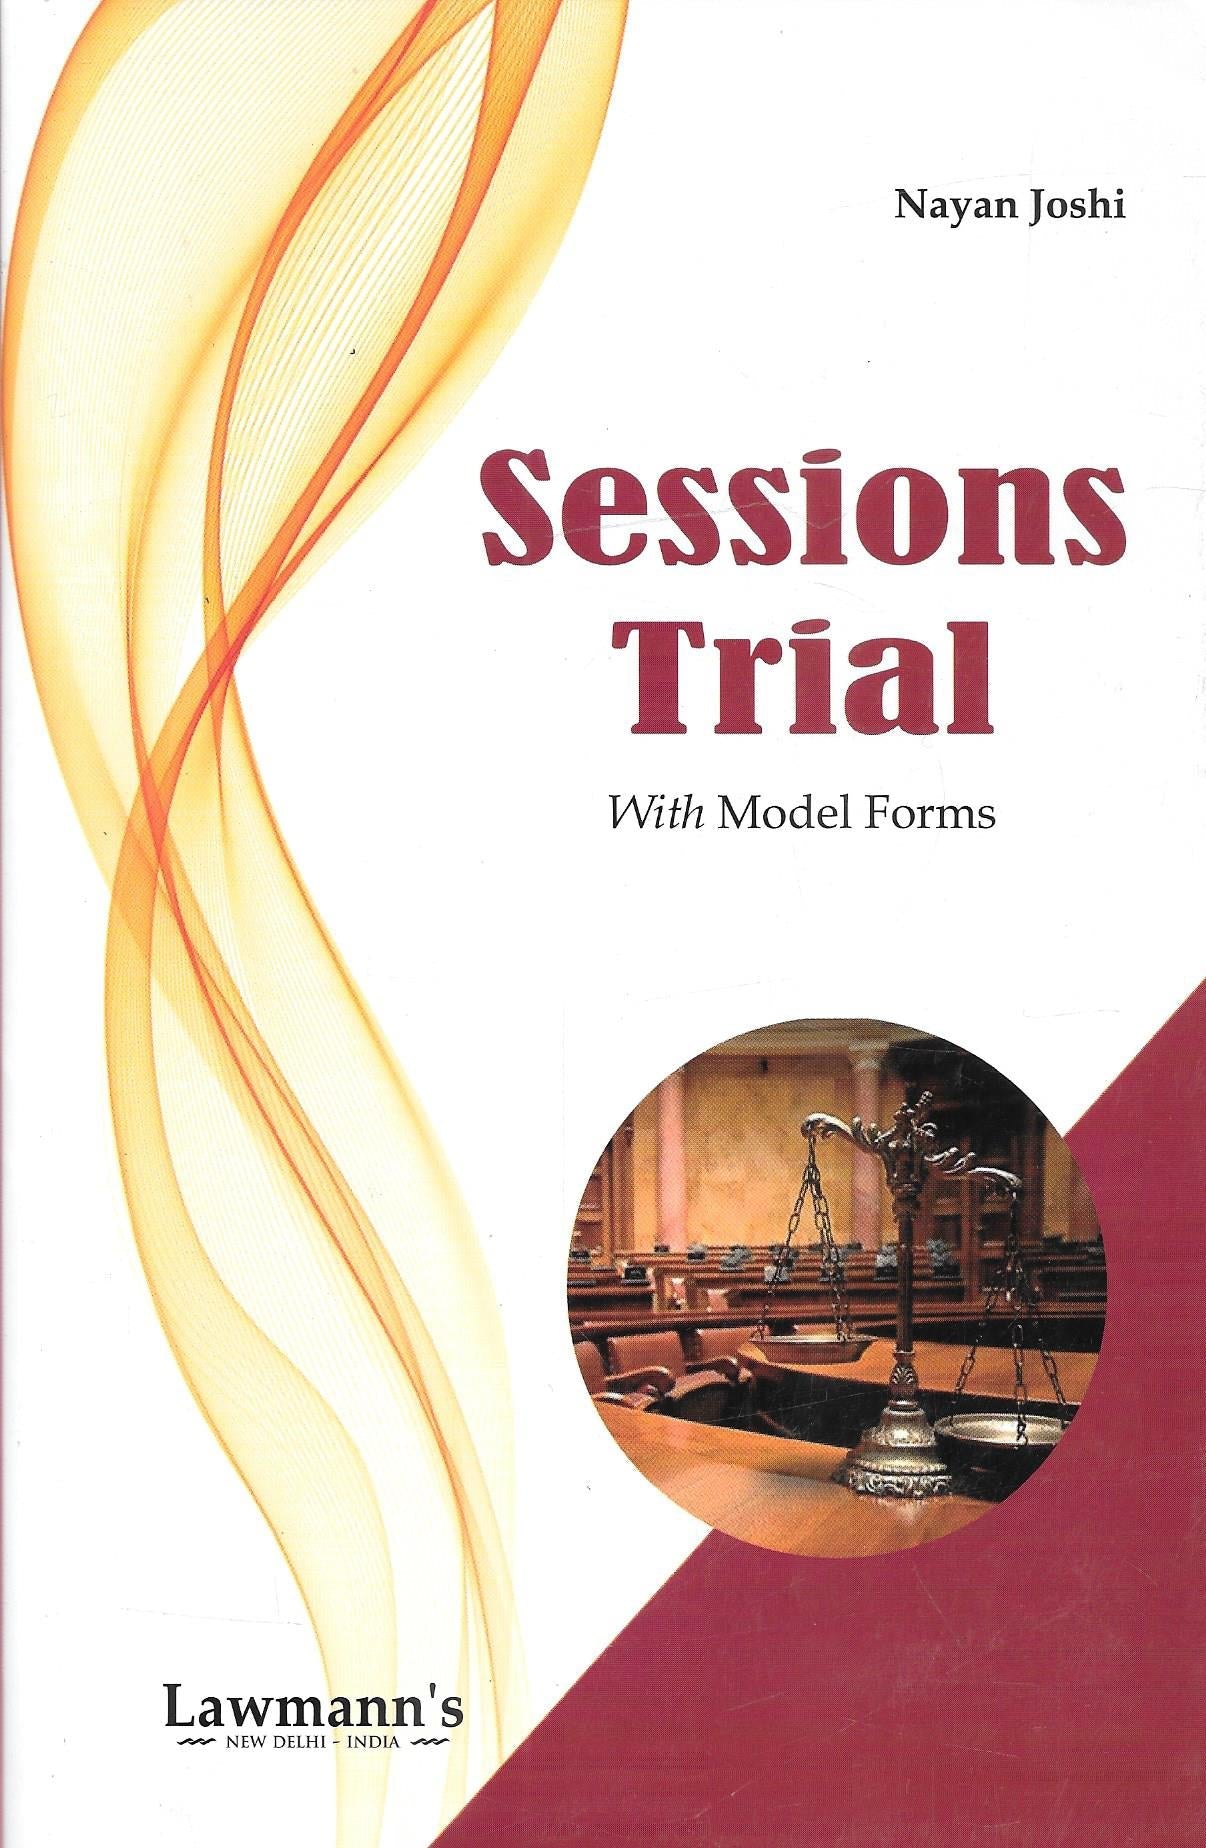 Session Trial with Model Forms